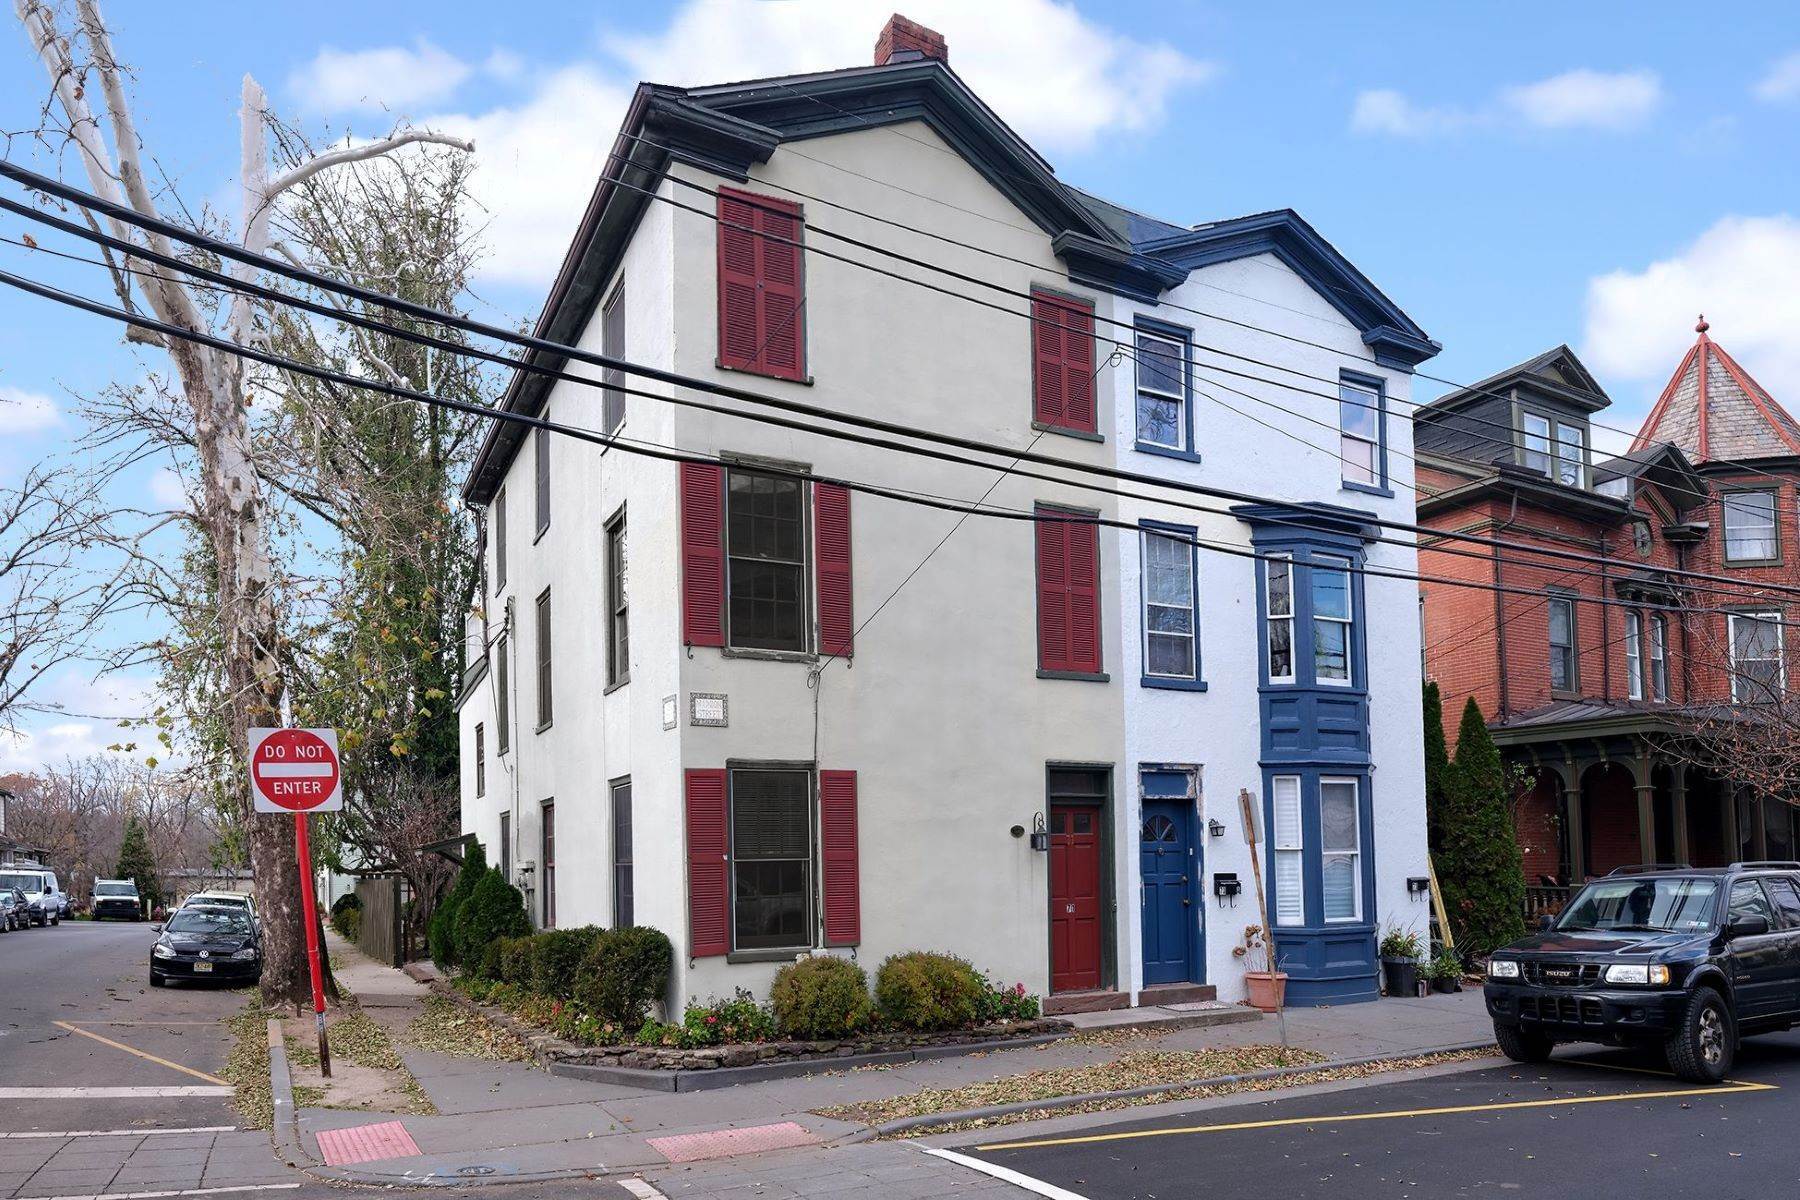 Multi-Family Homes for Sale at Fantastic Find For An Investment Opportunity! 71 North Union Street, Lambertville, New Jersey 08530 United States